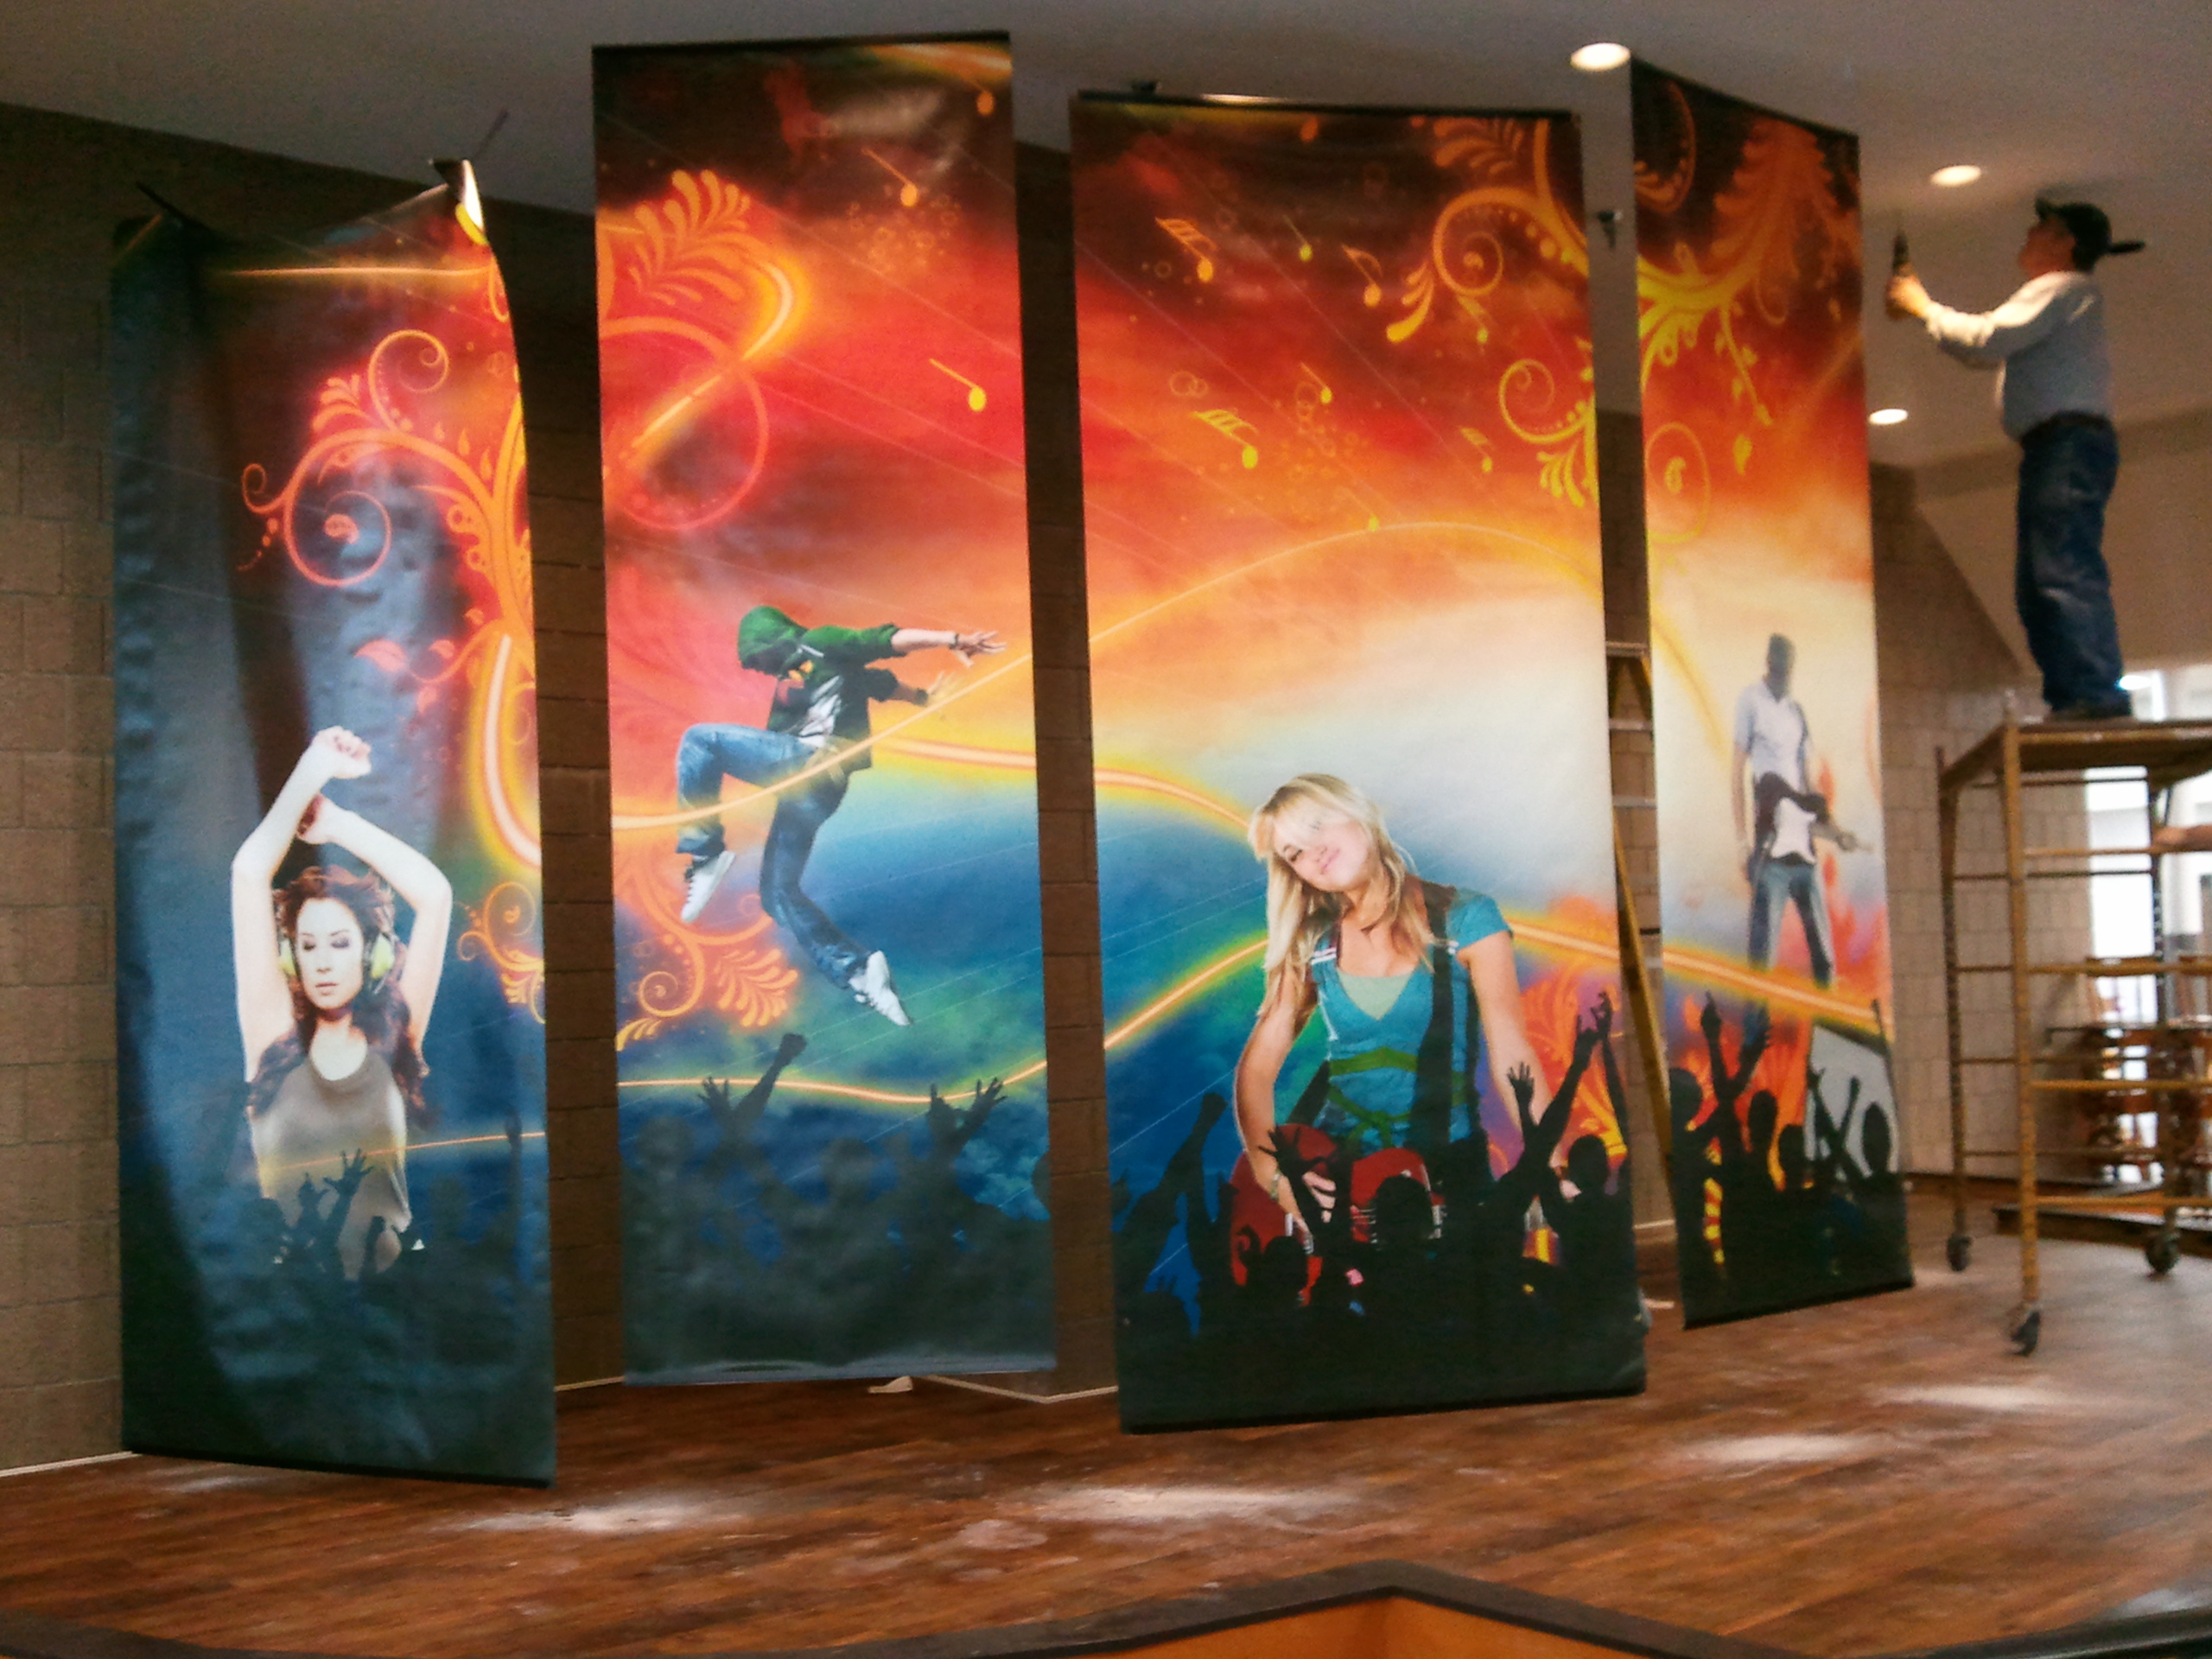 Outdoor and event banners